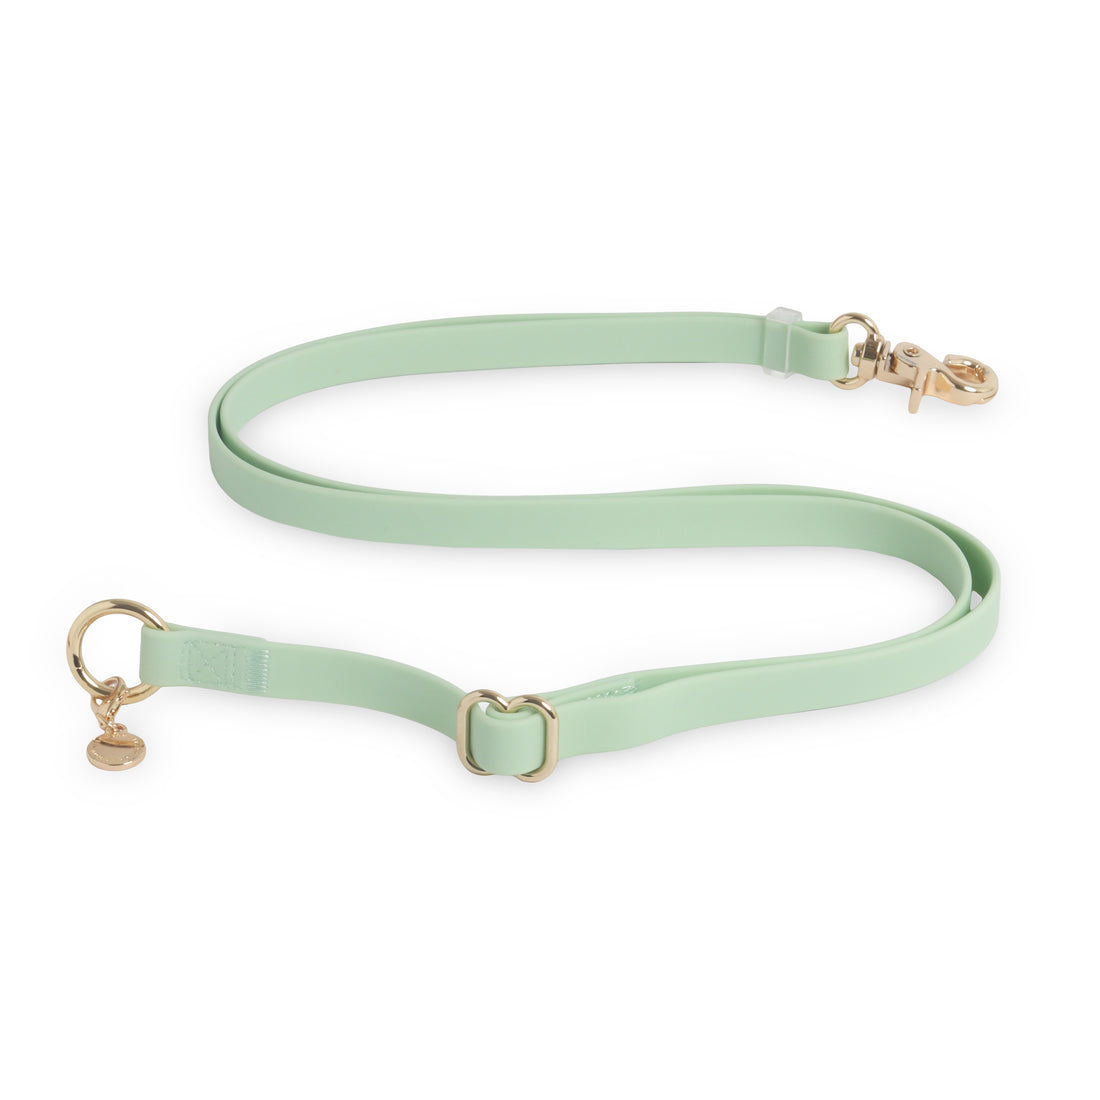 Pistachio Green Cloud Leash 4-Way Extension | Leash Connector | Extend Leash, Walk 2 Dogs, or Add a Traffic Handle